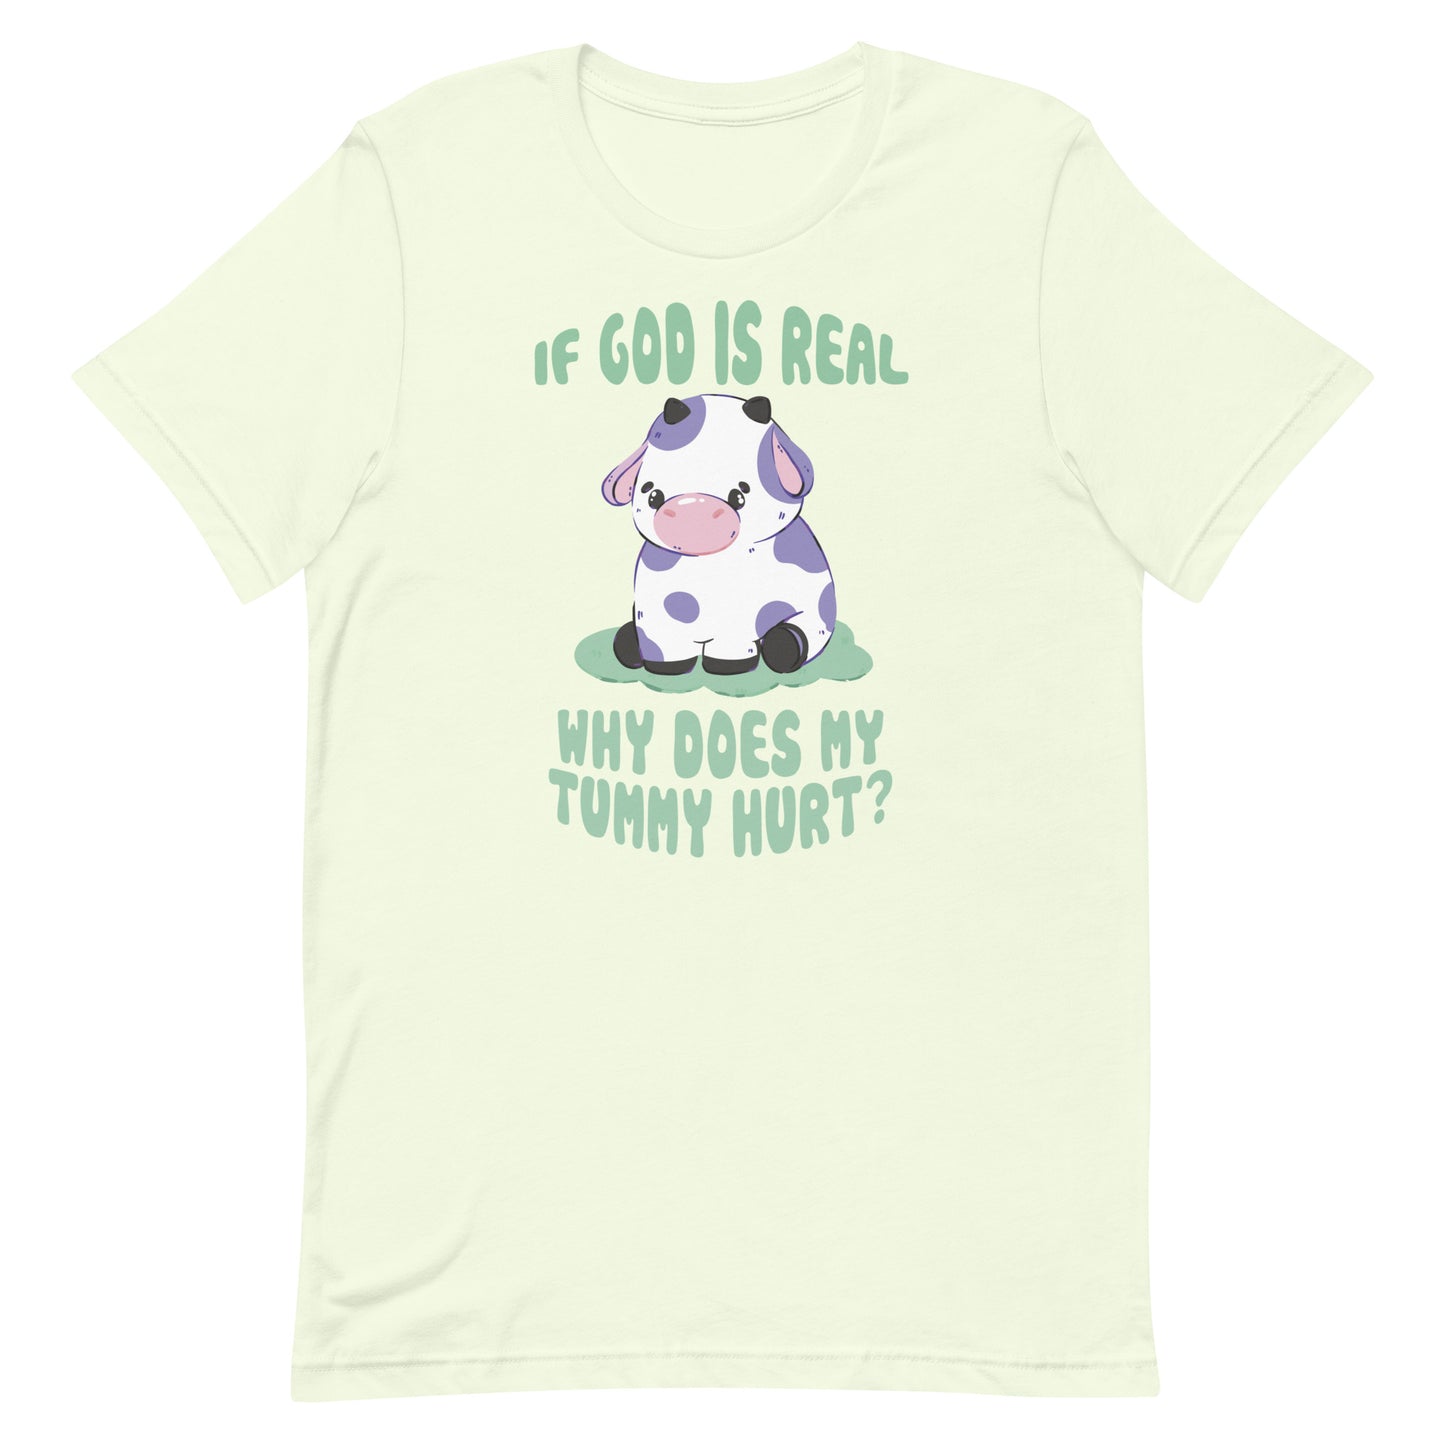 If God Is Real Why Does My Tummy Hurt (Cow) Unisex t-shirt